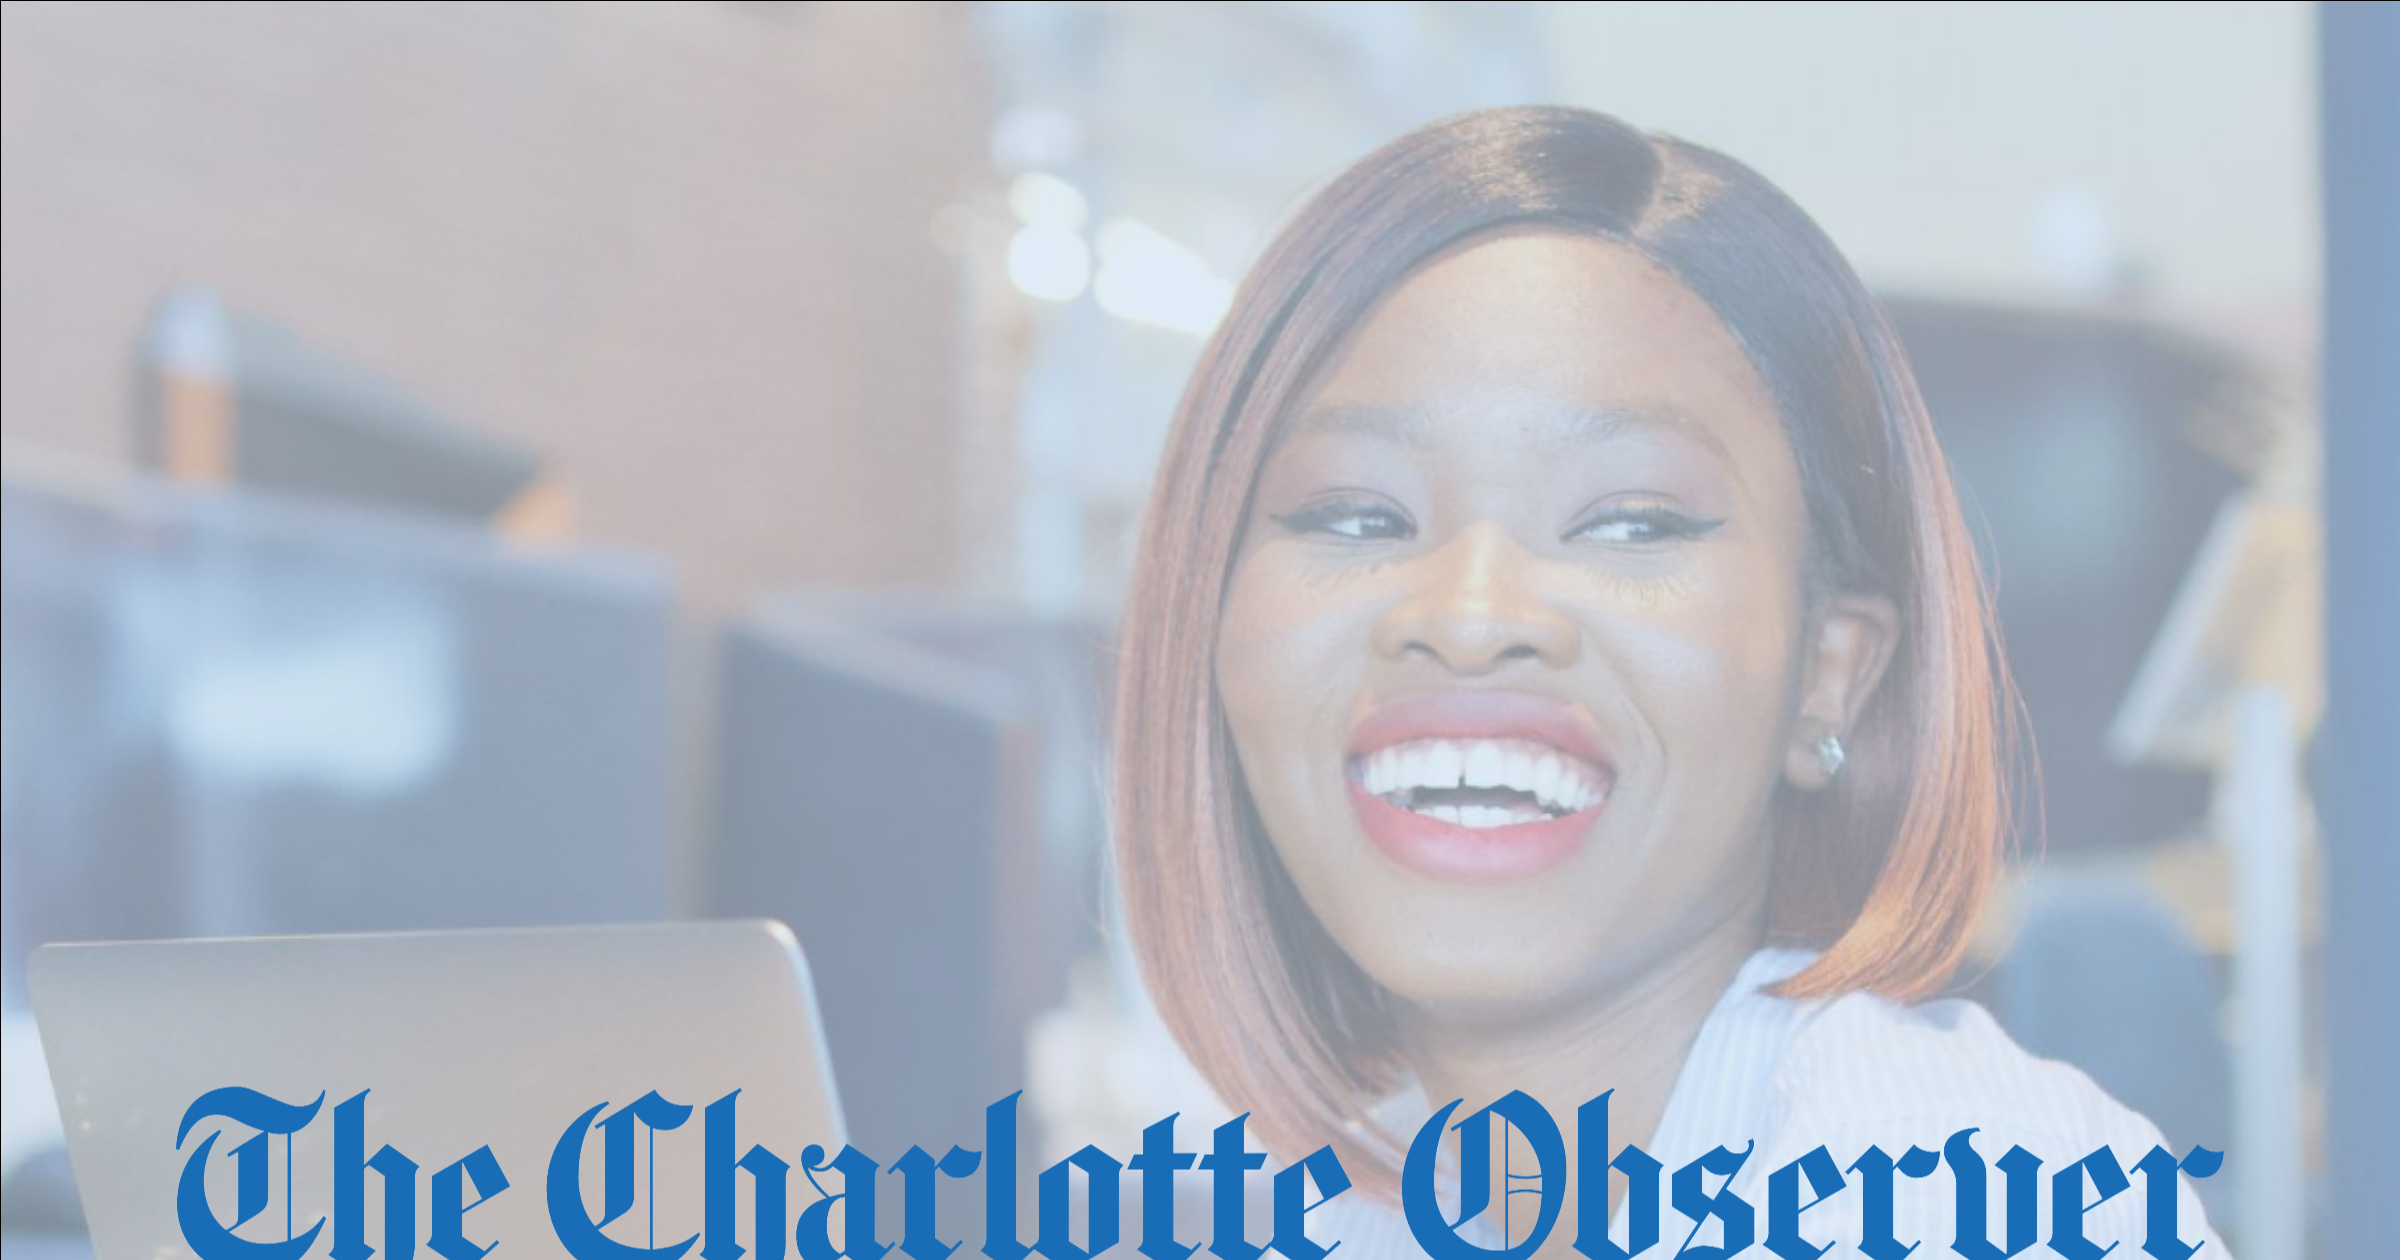 research assistant jobs charlotte nc